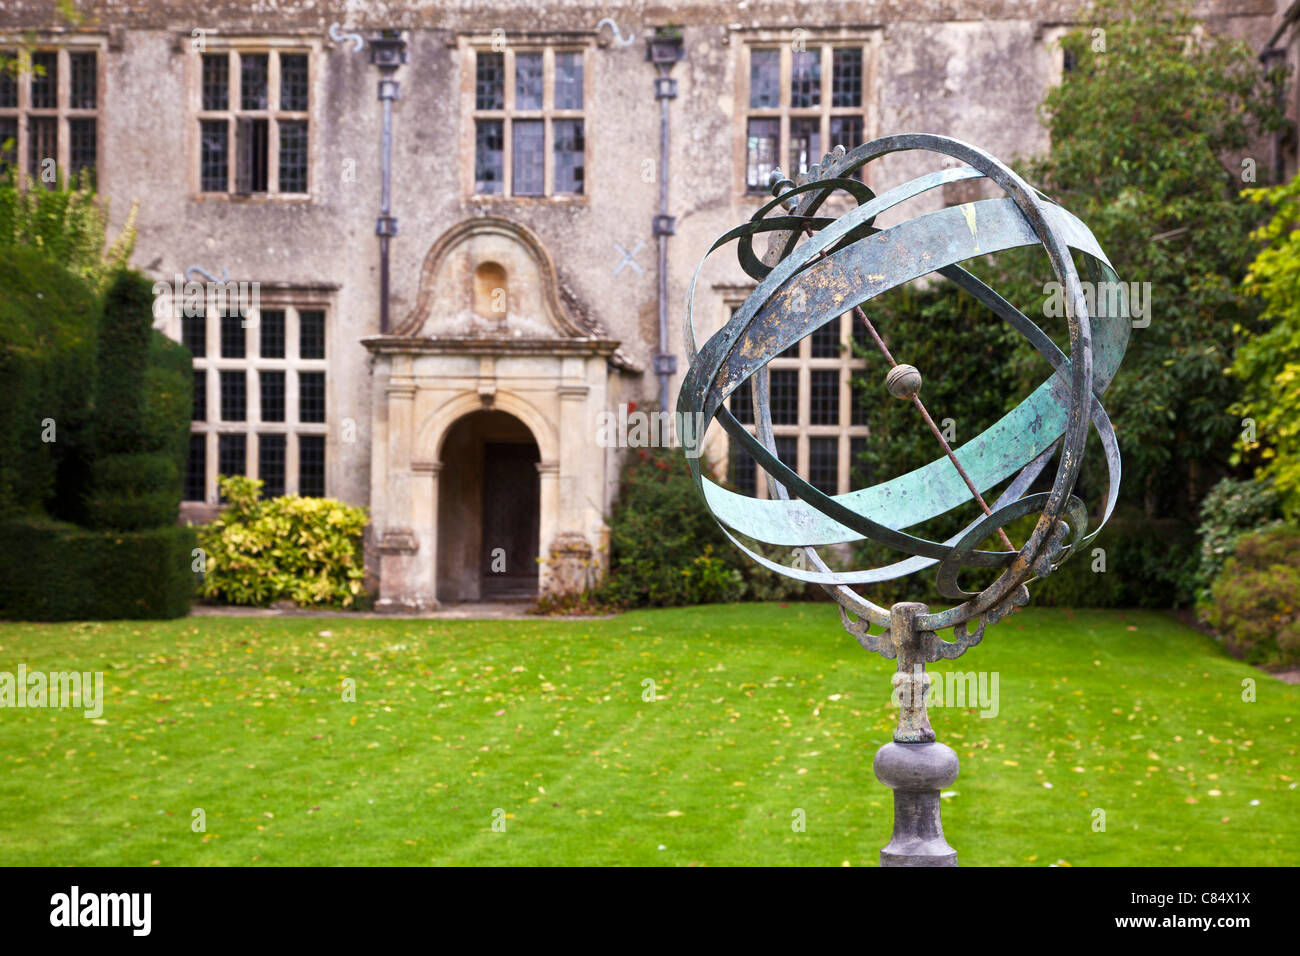 A sundial or astrolabe in the garden of a typical English country manor in Avebury in Wiltshire, England, UK Stock Photo